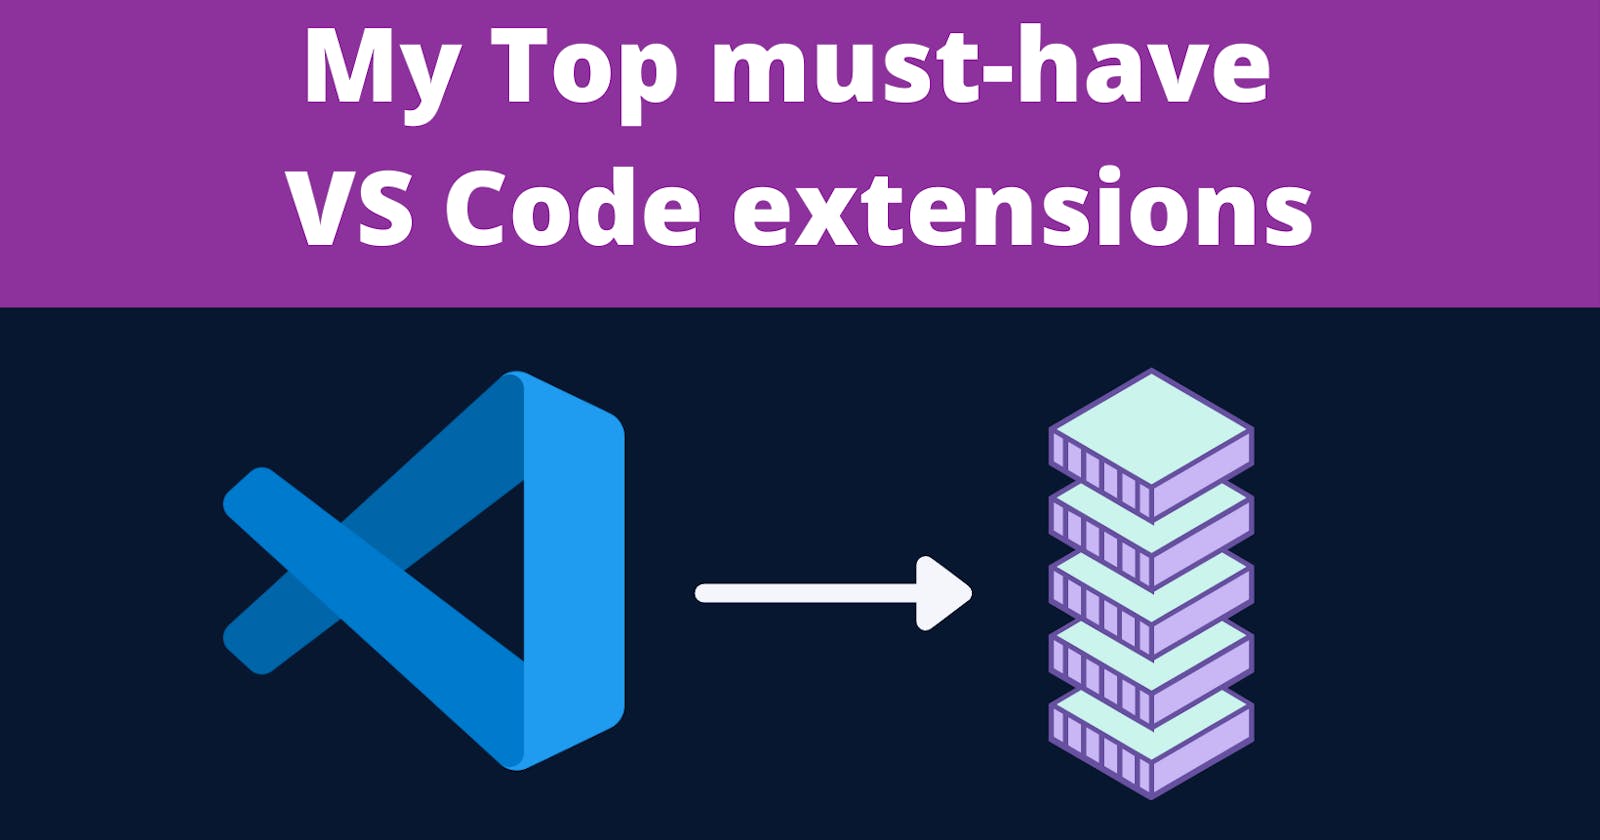 My Top must-have VS Code extensions